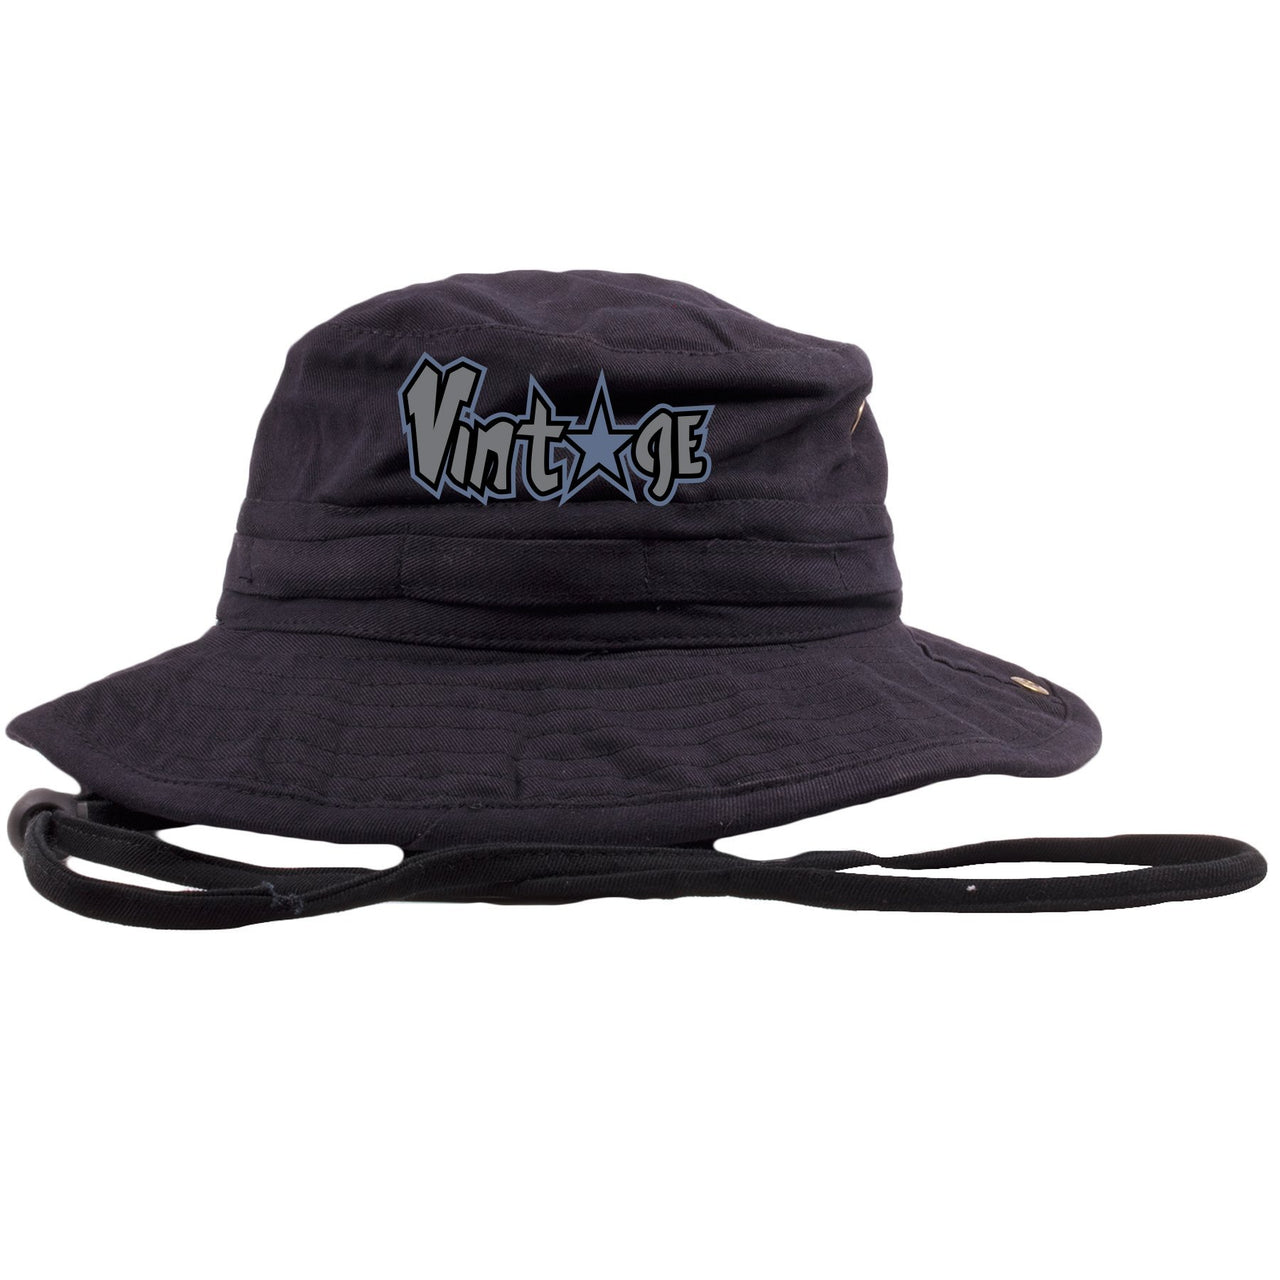 Cap and Gown 13s Bucket Hat | Vintage Star Logo, Black